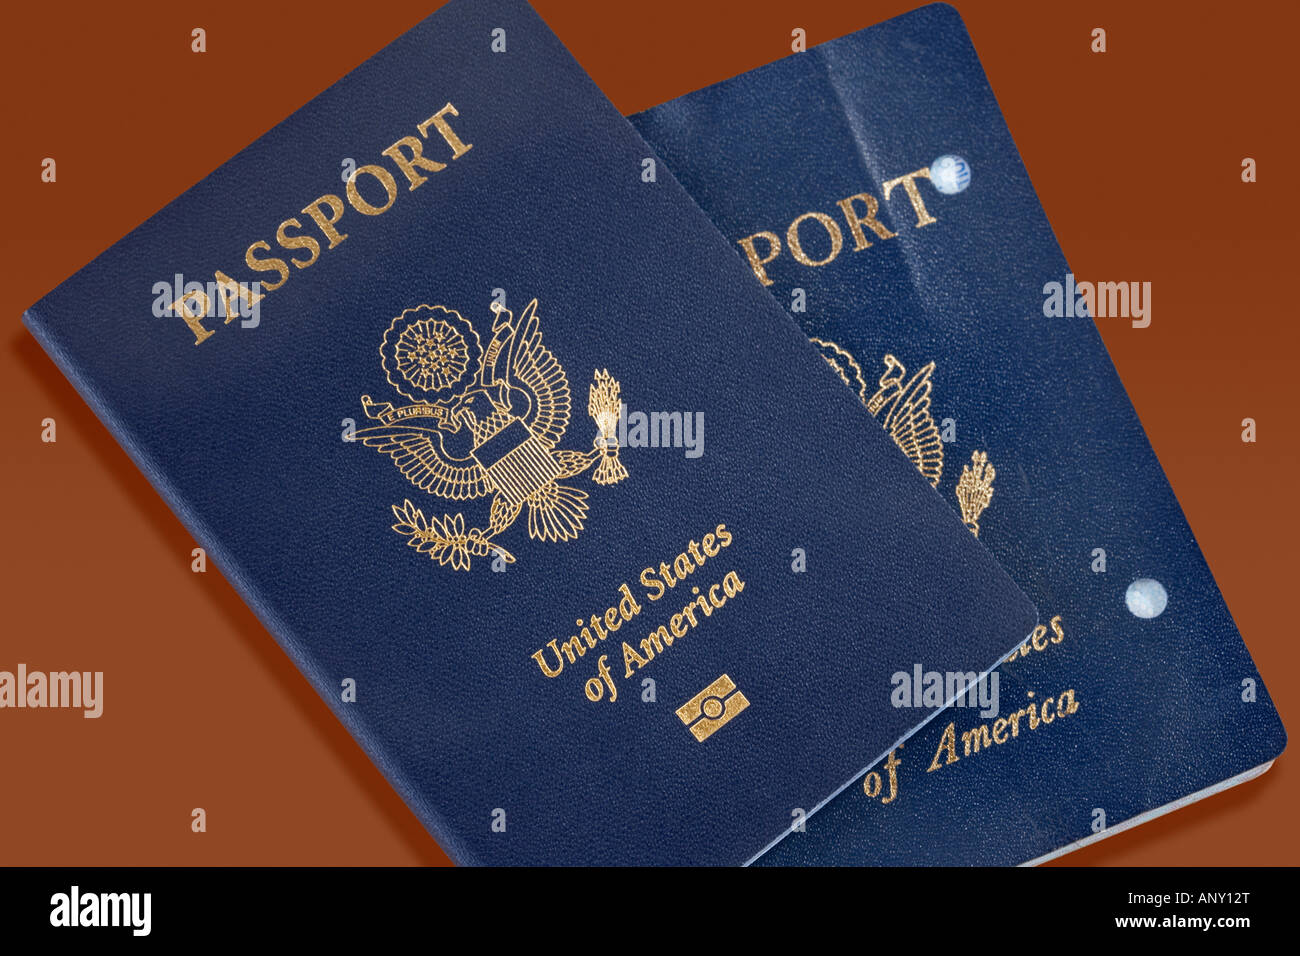 New electronic passport with old canceled non chipped version Stock Photo